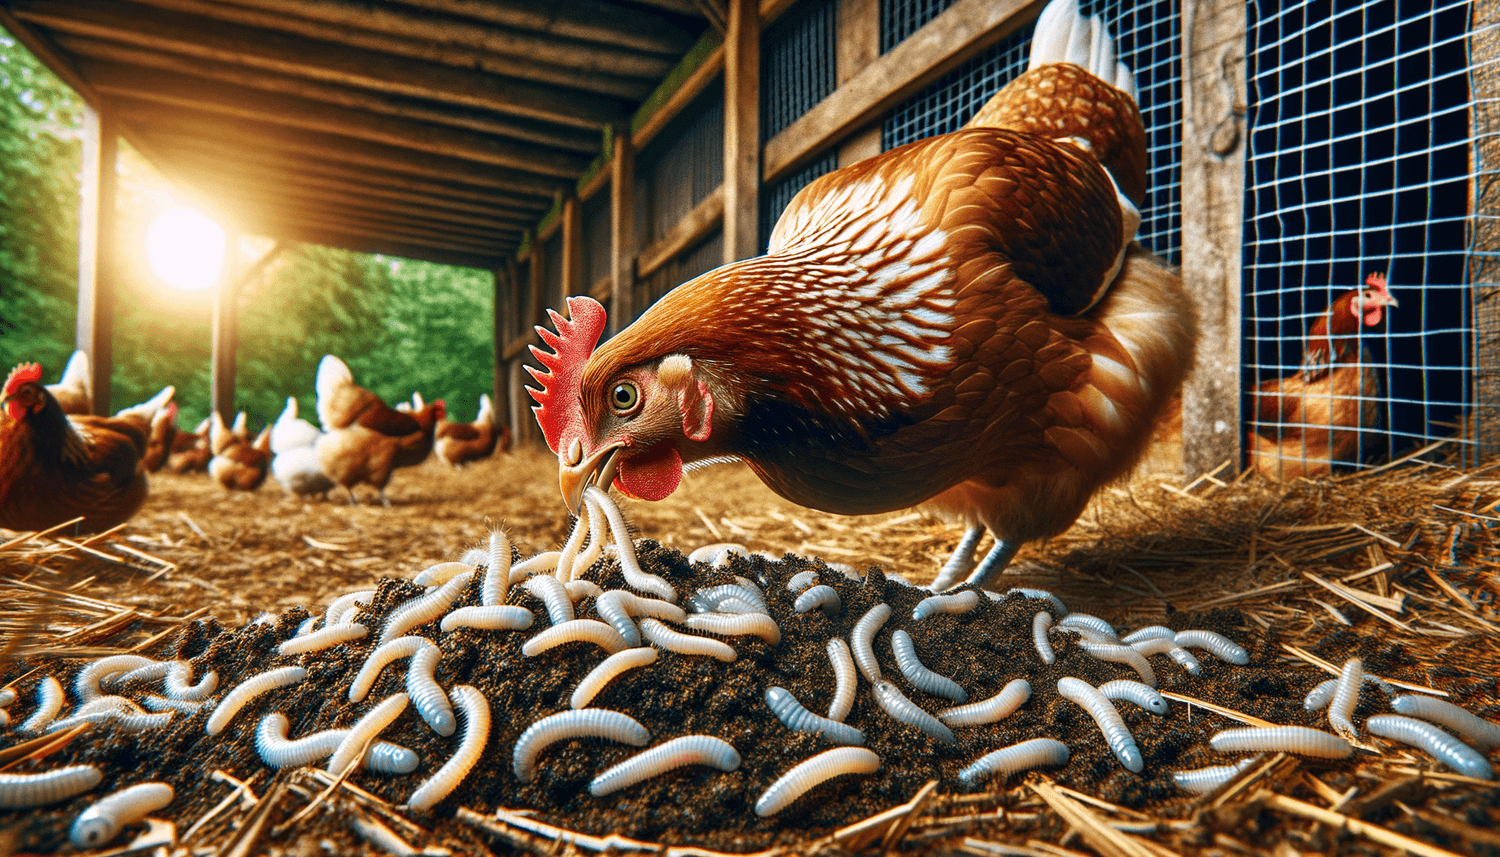 Can Chickens Eat Maggots?